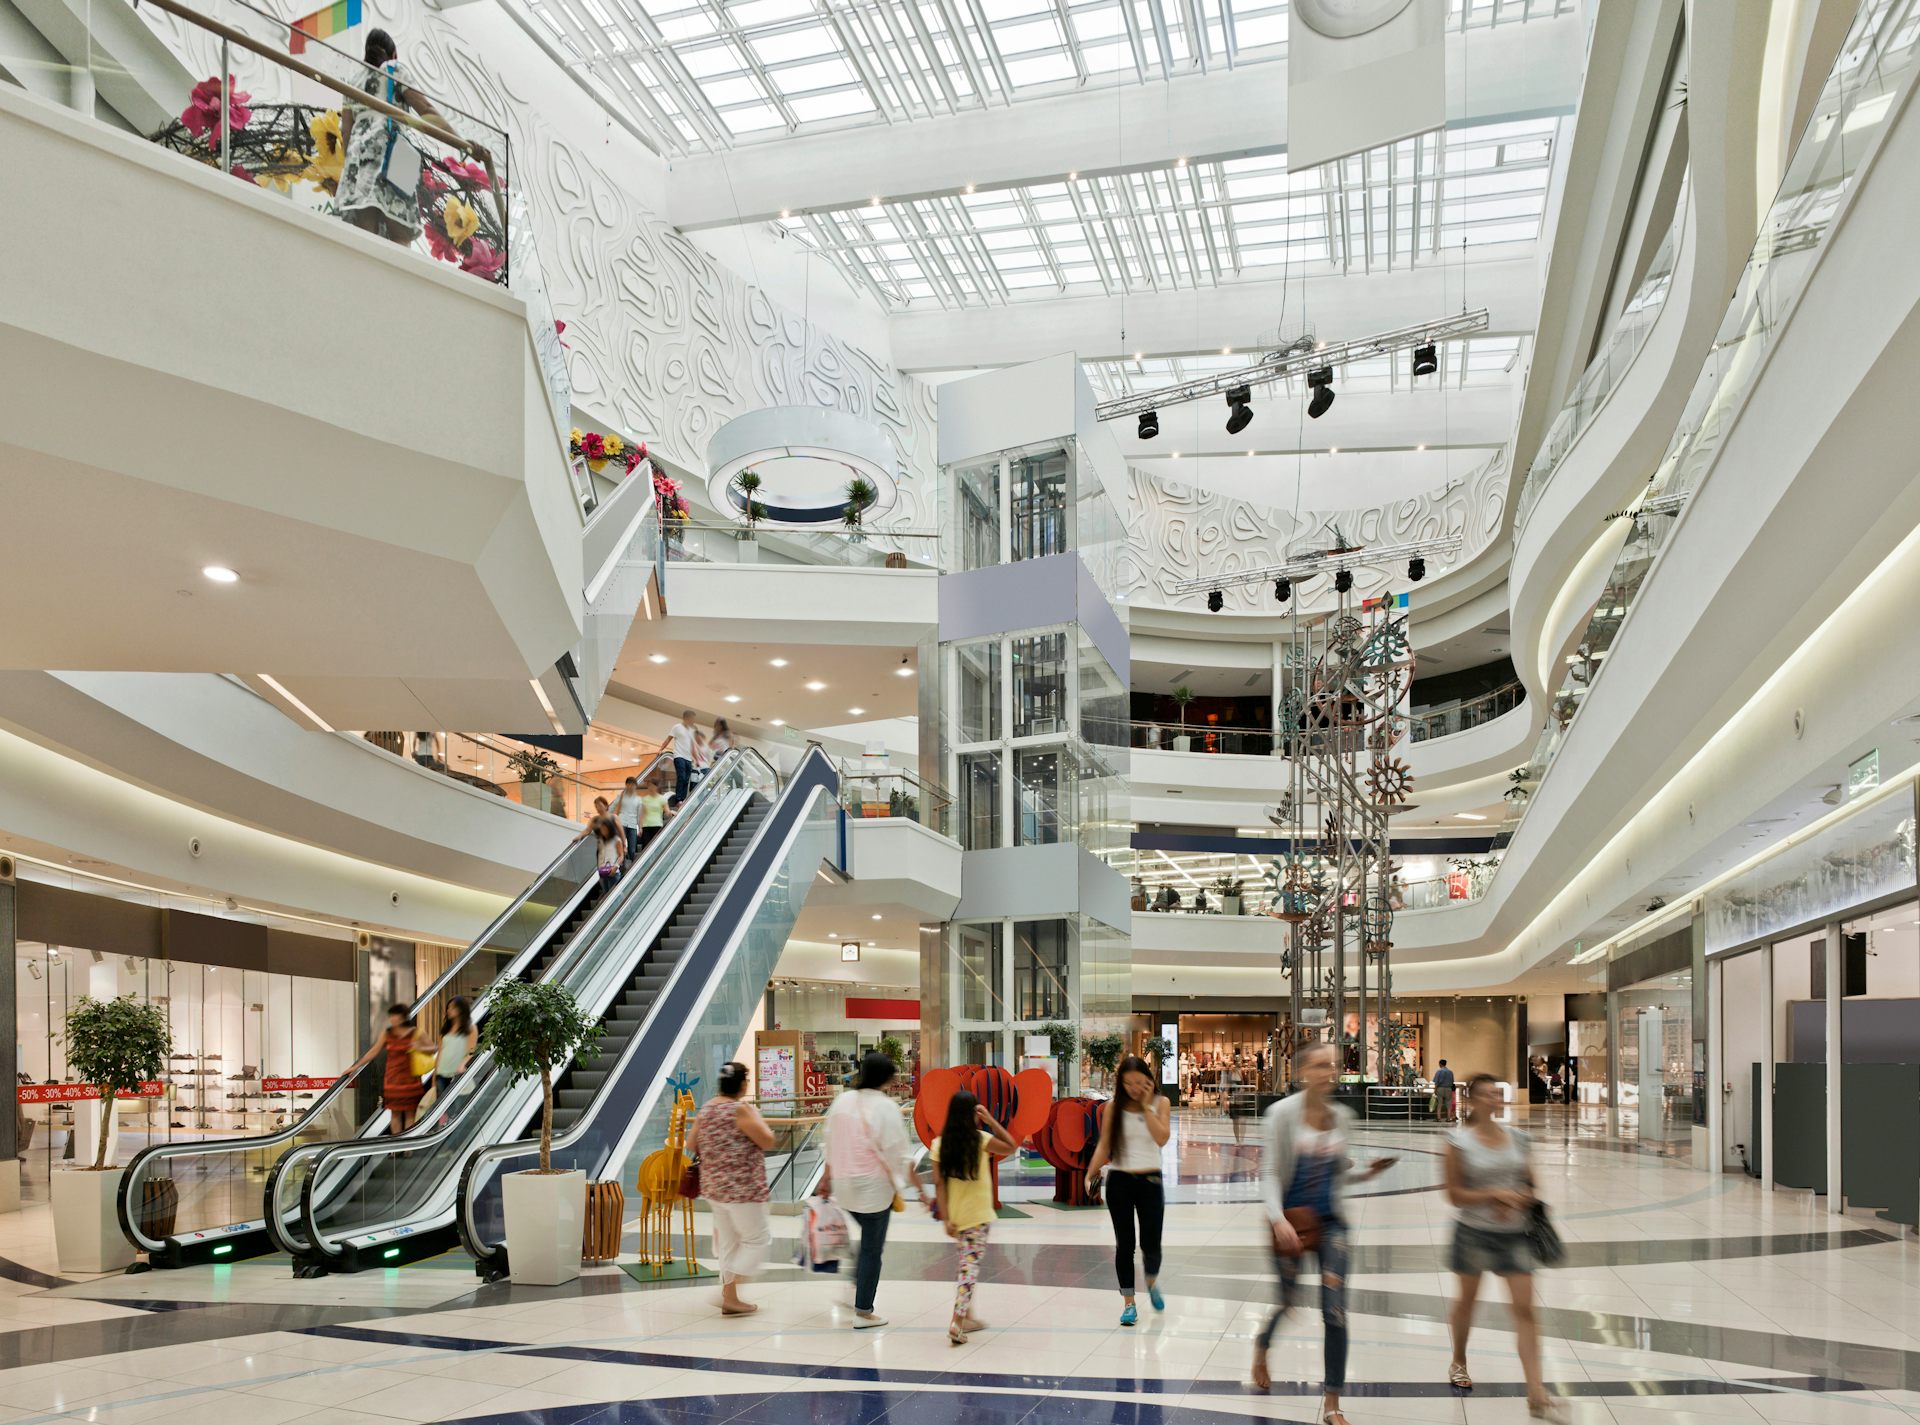 Shopping Mall Photos Download The BEST Free Shopping Mall Stock Photos   HD Images